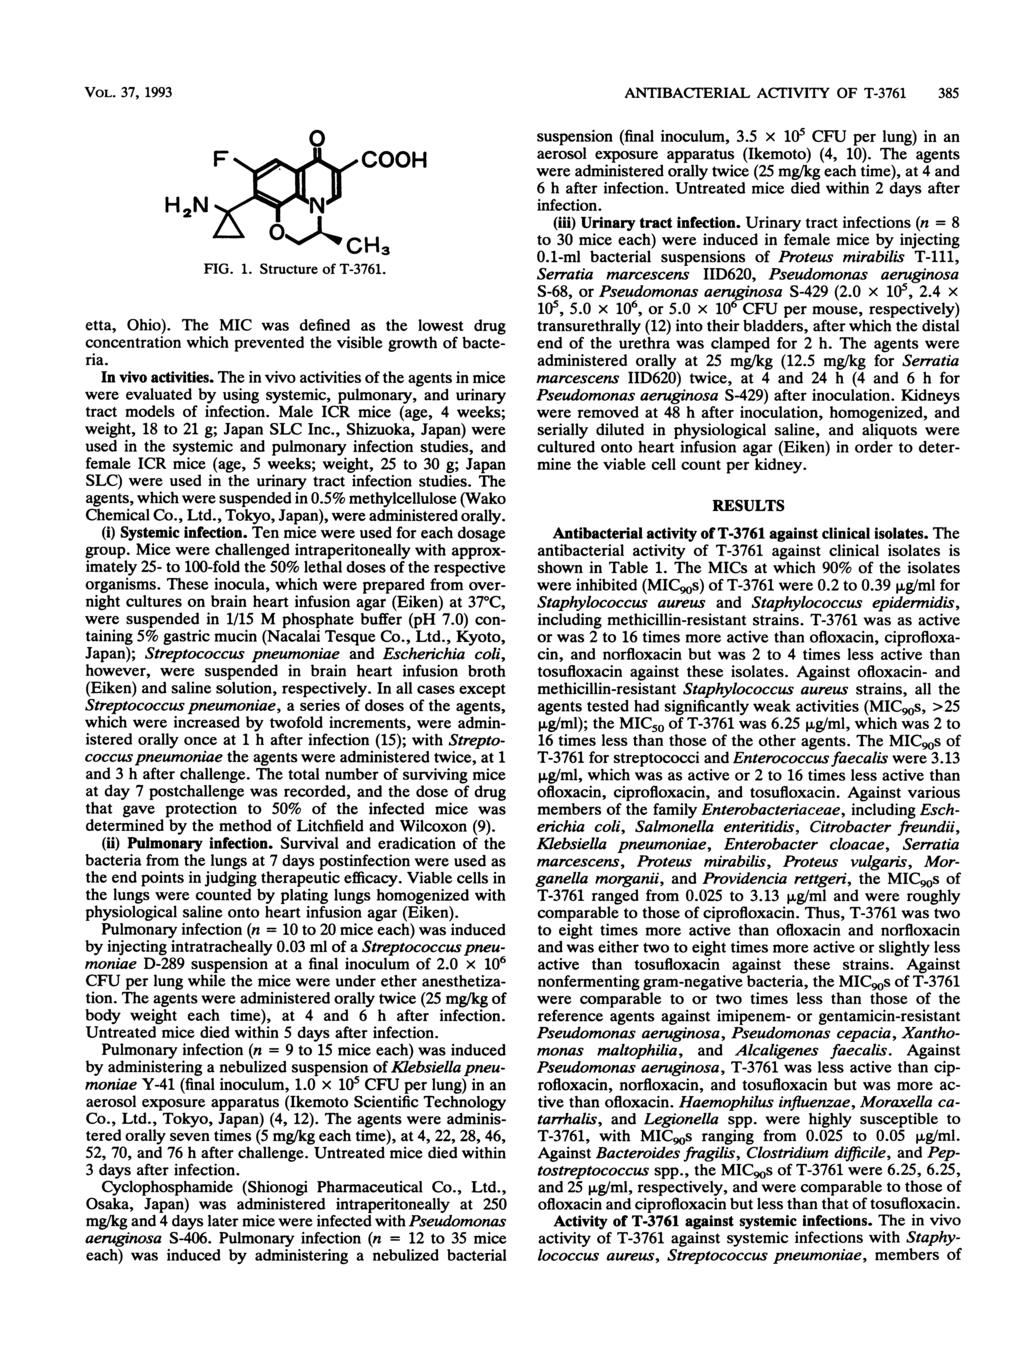 VOL. 37, 1993 H2N N' CH3 FIG. 1. Structure of. etta, Ohio). The MIC was defined as the lowest drug concentration which prevented the visible growth of bacteria. In vivo activities.